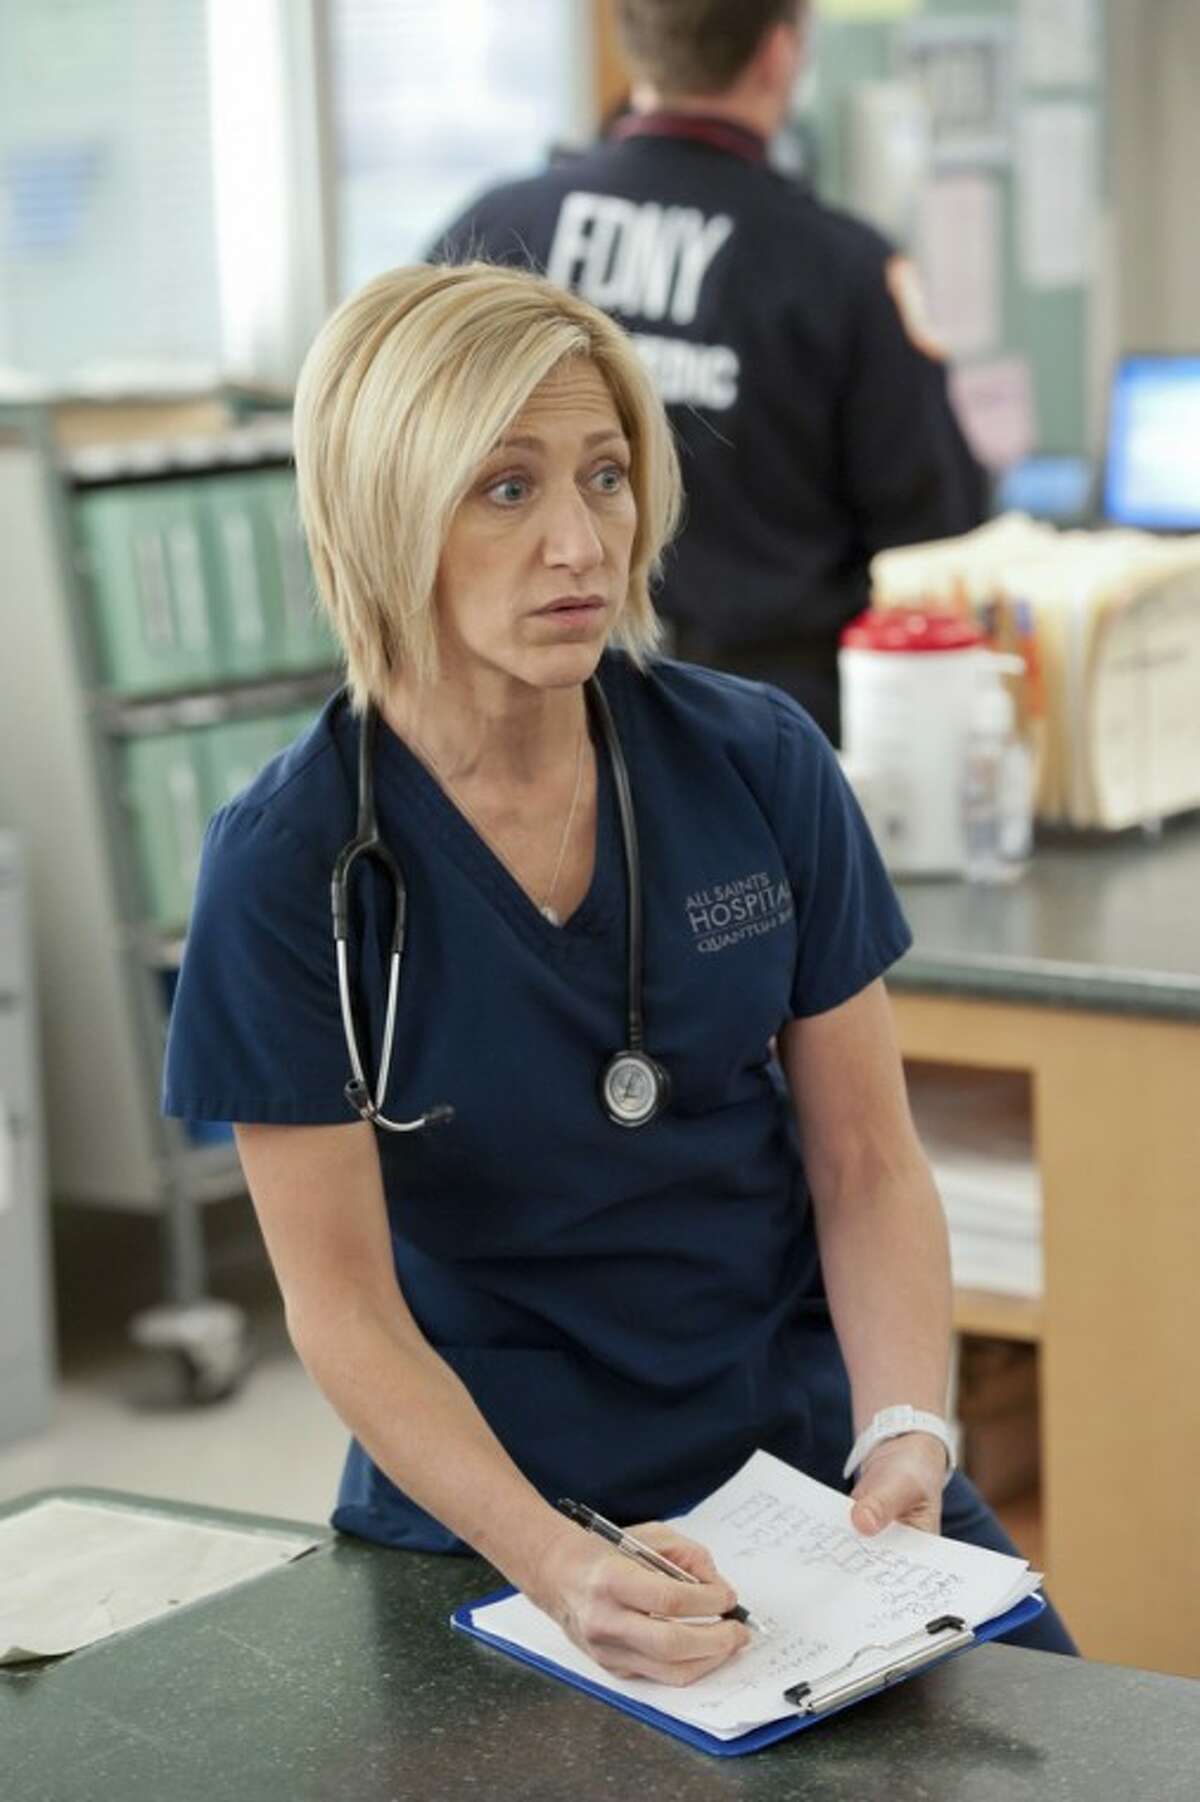 This image released by Showtime shows Edie Falco as Jackie Peyton in an episode of "Nurse Jackie." Falco was nominated for an Emmy award on Thursday, July 19, 2012 for outstanding lead actress in a comedy. series. The 64th annual Primetime Emmy Awards will be presented Sept. 23 at the Nokia Theatre in Los Angeles, hosted by Jimmy Kimmel and airing live on ABC. (AP Photo/Showtime, David M. Russell)